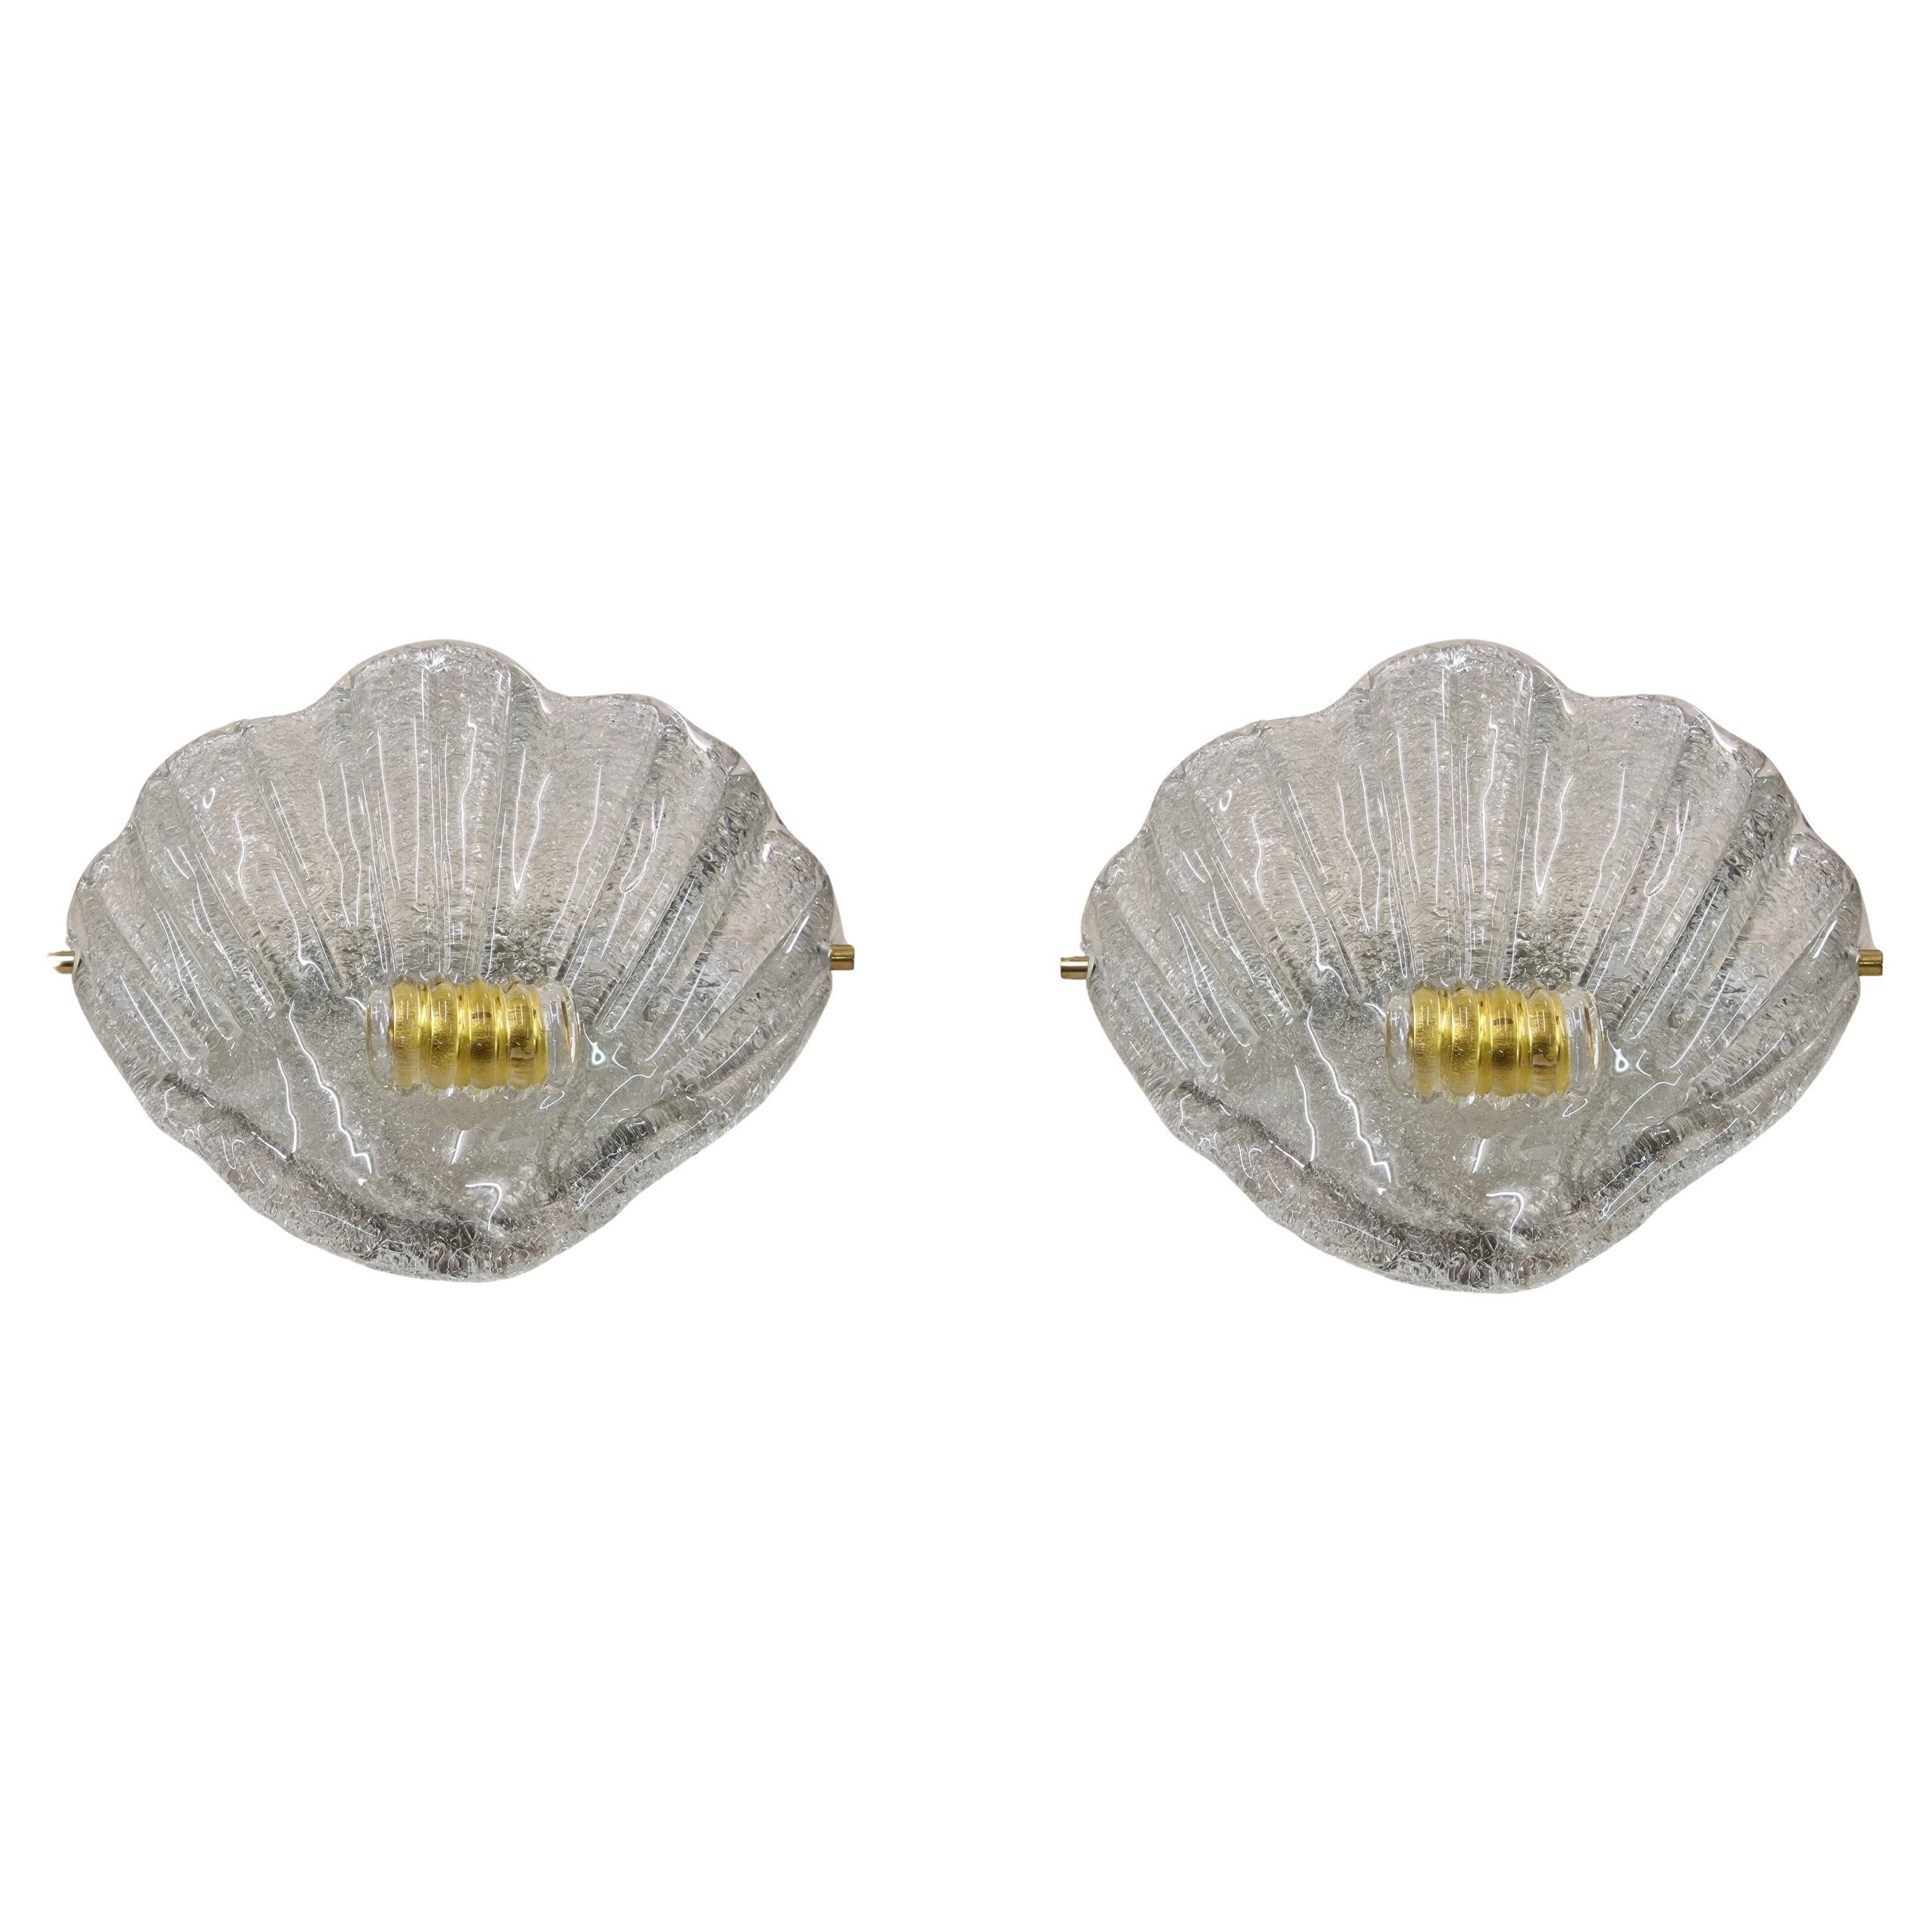 Pair of wall lights, appliques, shell, 1980s Murano design Barovier & Toso Italy